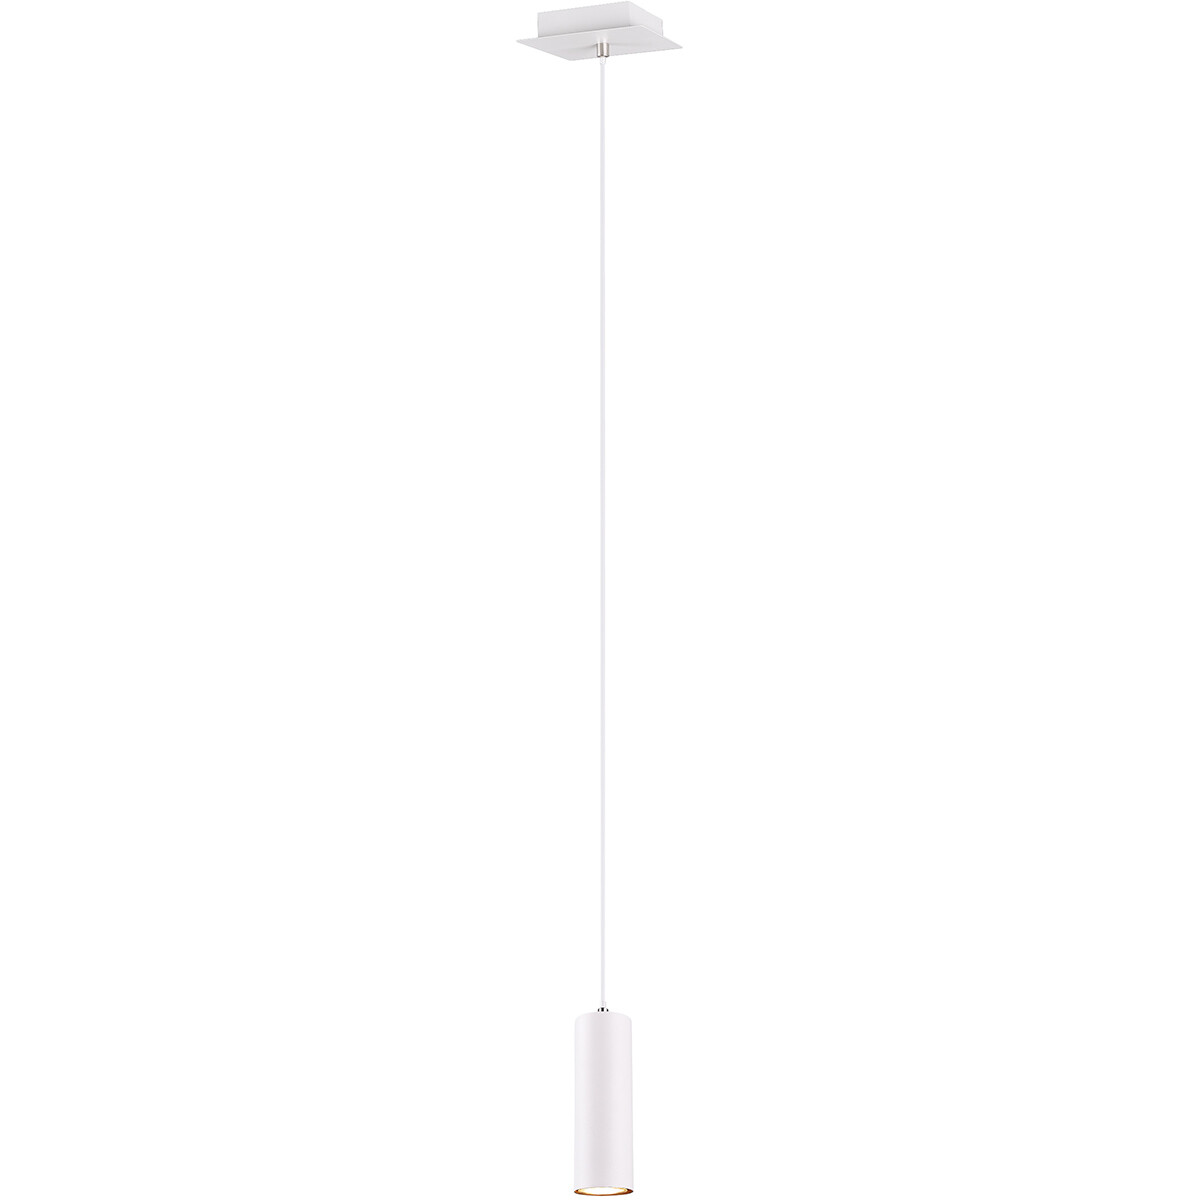 LED Hanglamp Trion Mary GU10 Fitting 1-lichts Rond Mat Wit Aluminium